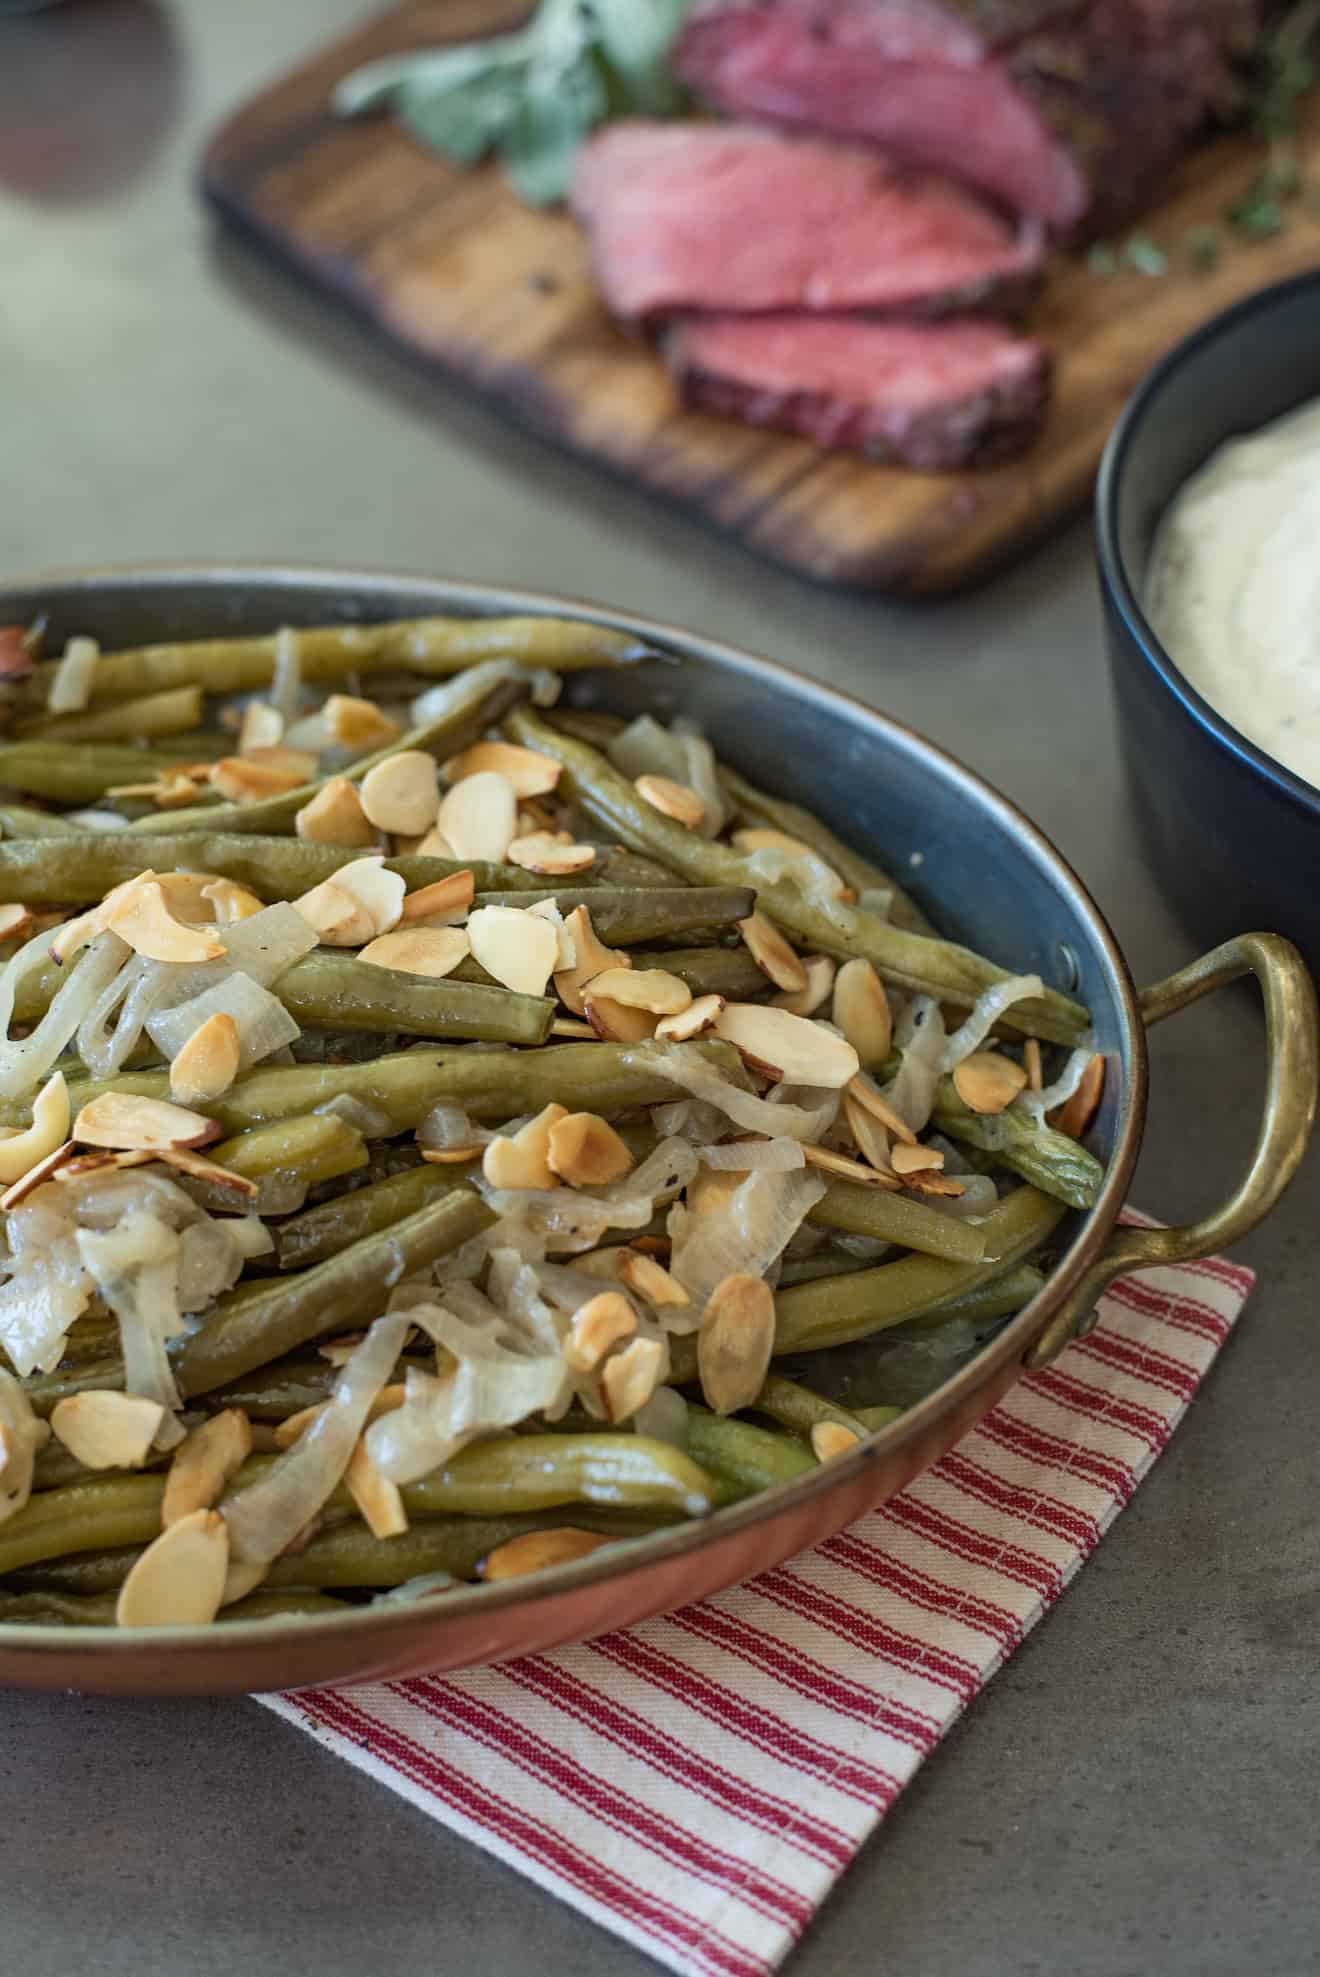 A closeup showing the shallots and toasted almonds on top of the green beans.